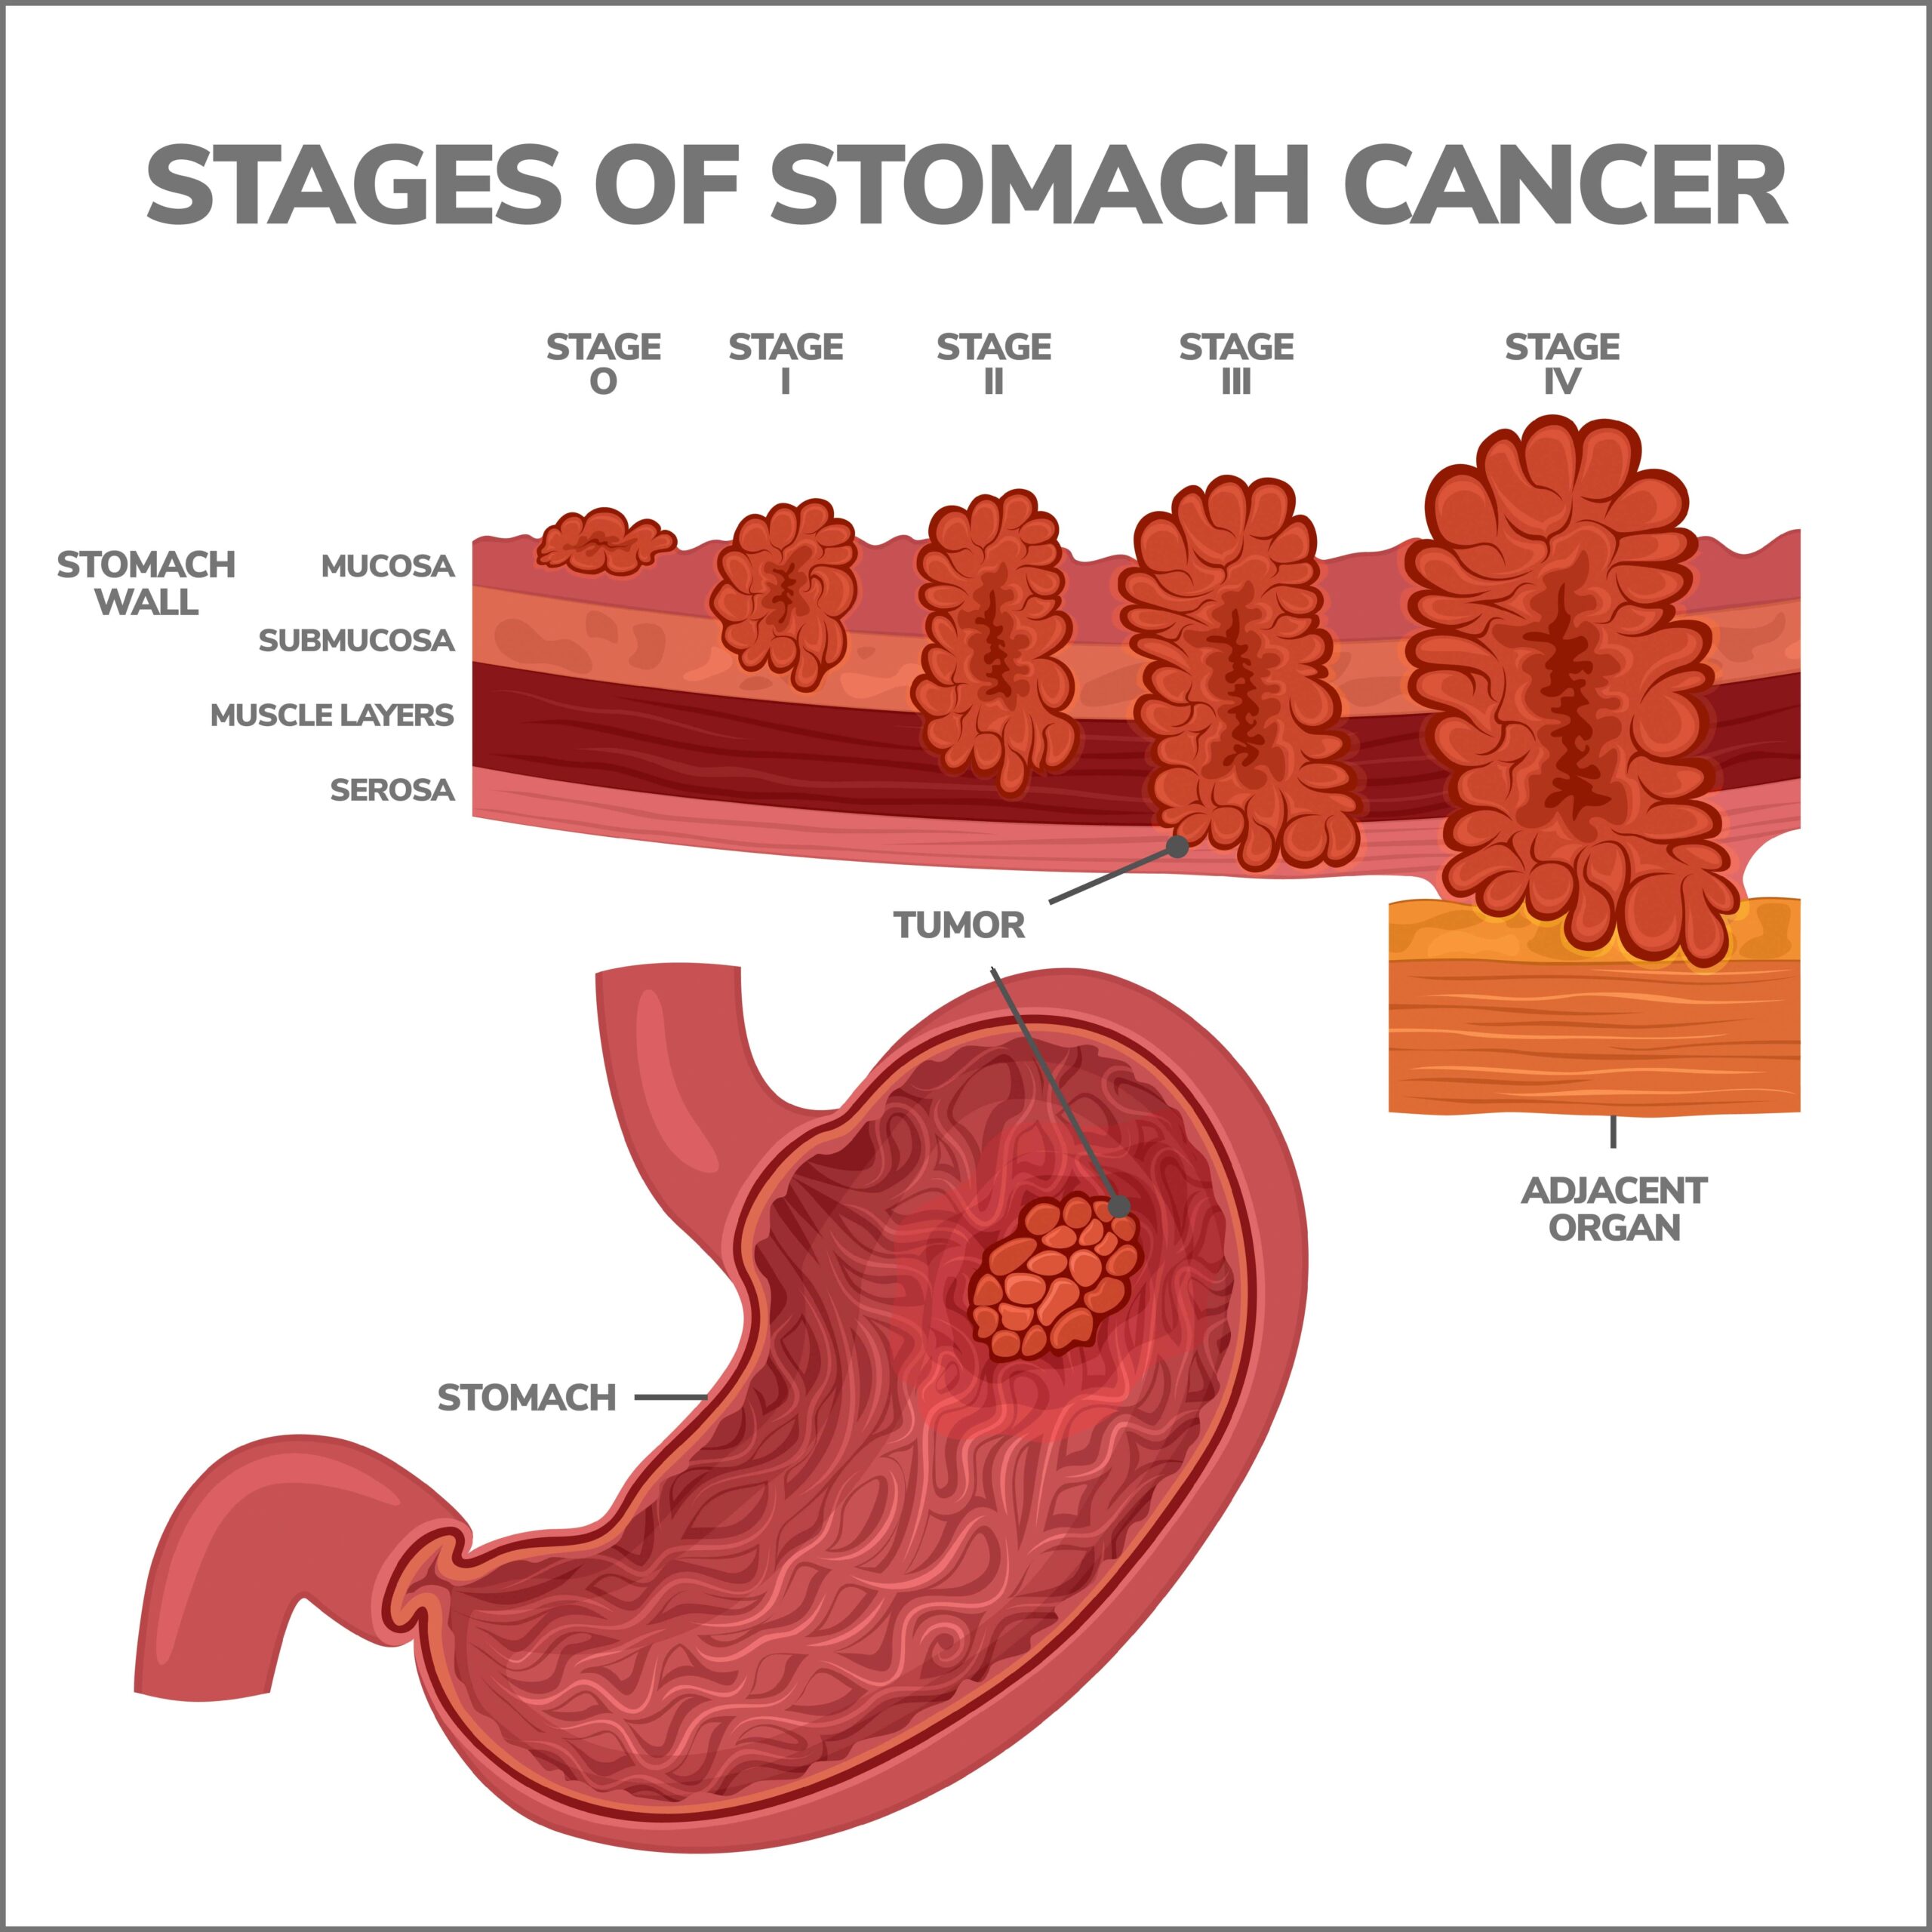 Understanding the Progression of Stomach Cancer: How Fast Does it Spread?